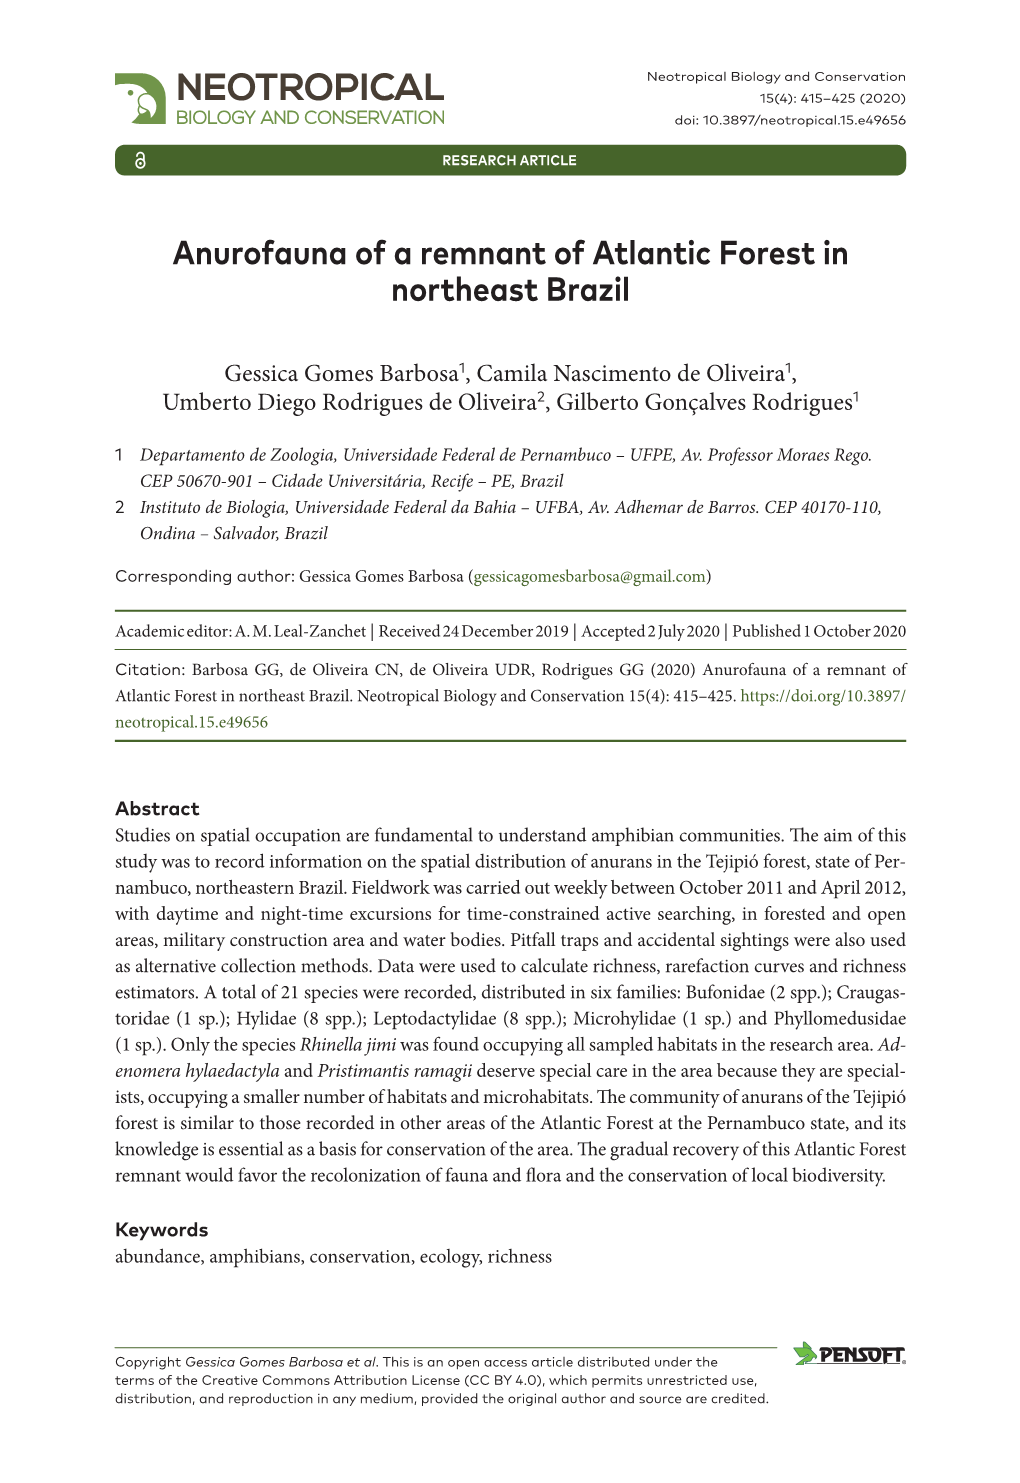 ﻿Anurofauna of a Remnant of Atlantic Forest in Northeast Brazil